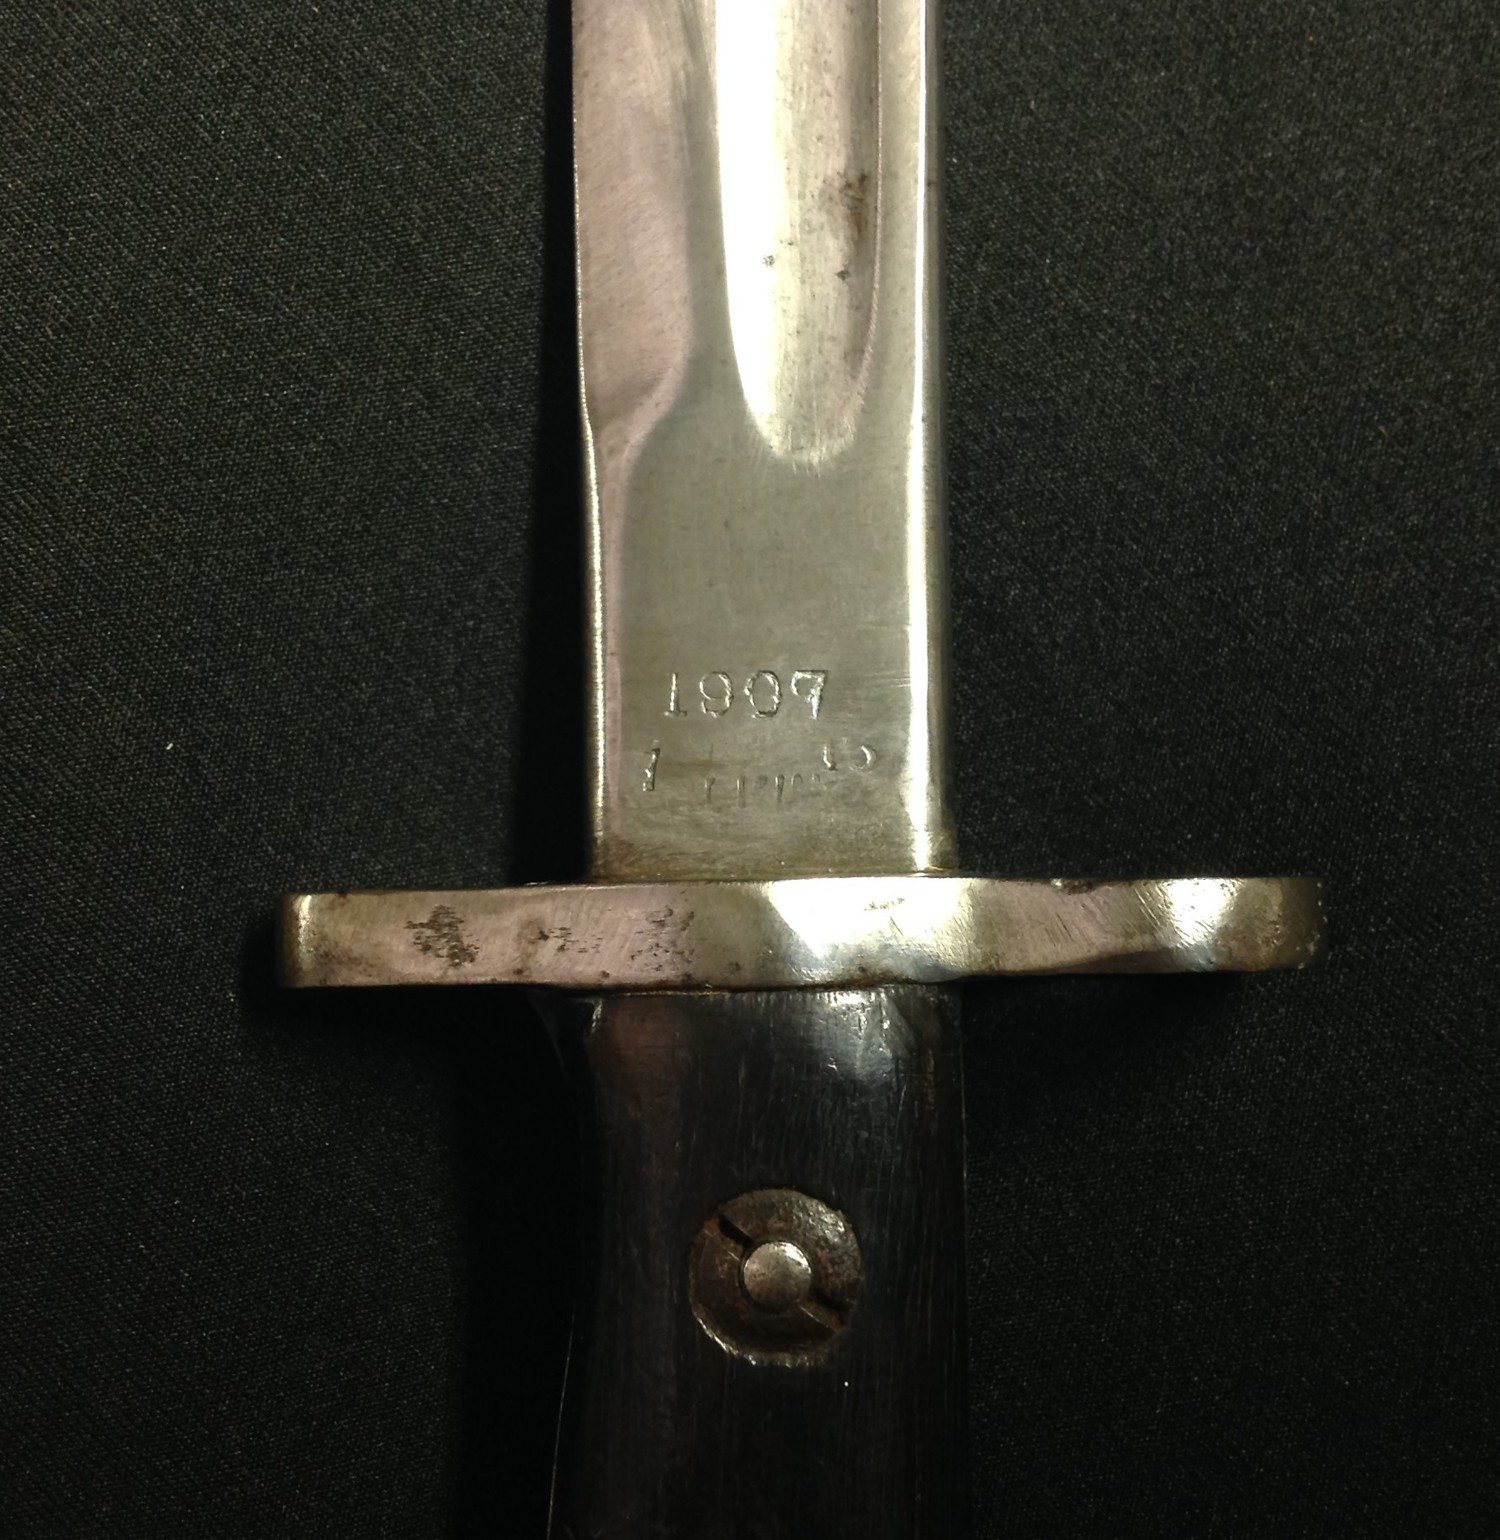 WW1 British 1907 Pattern Bayonet maker marked and dated Wilkinson 7 16. No release catch. Single - Image 3 of 8